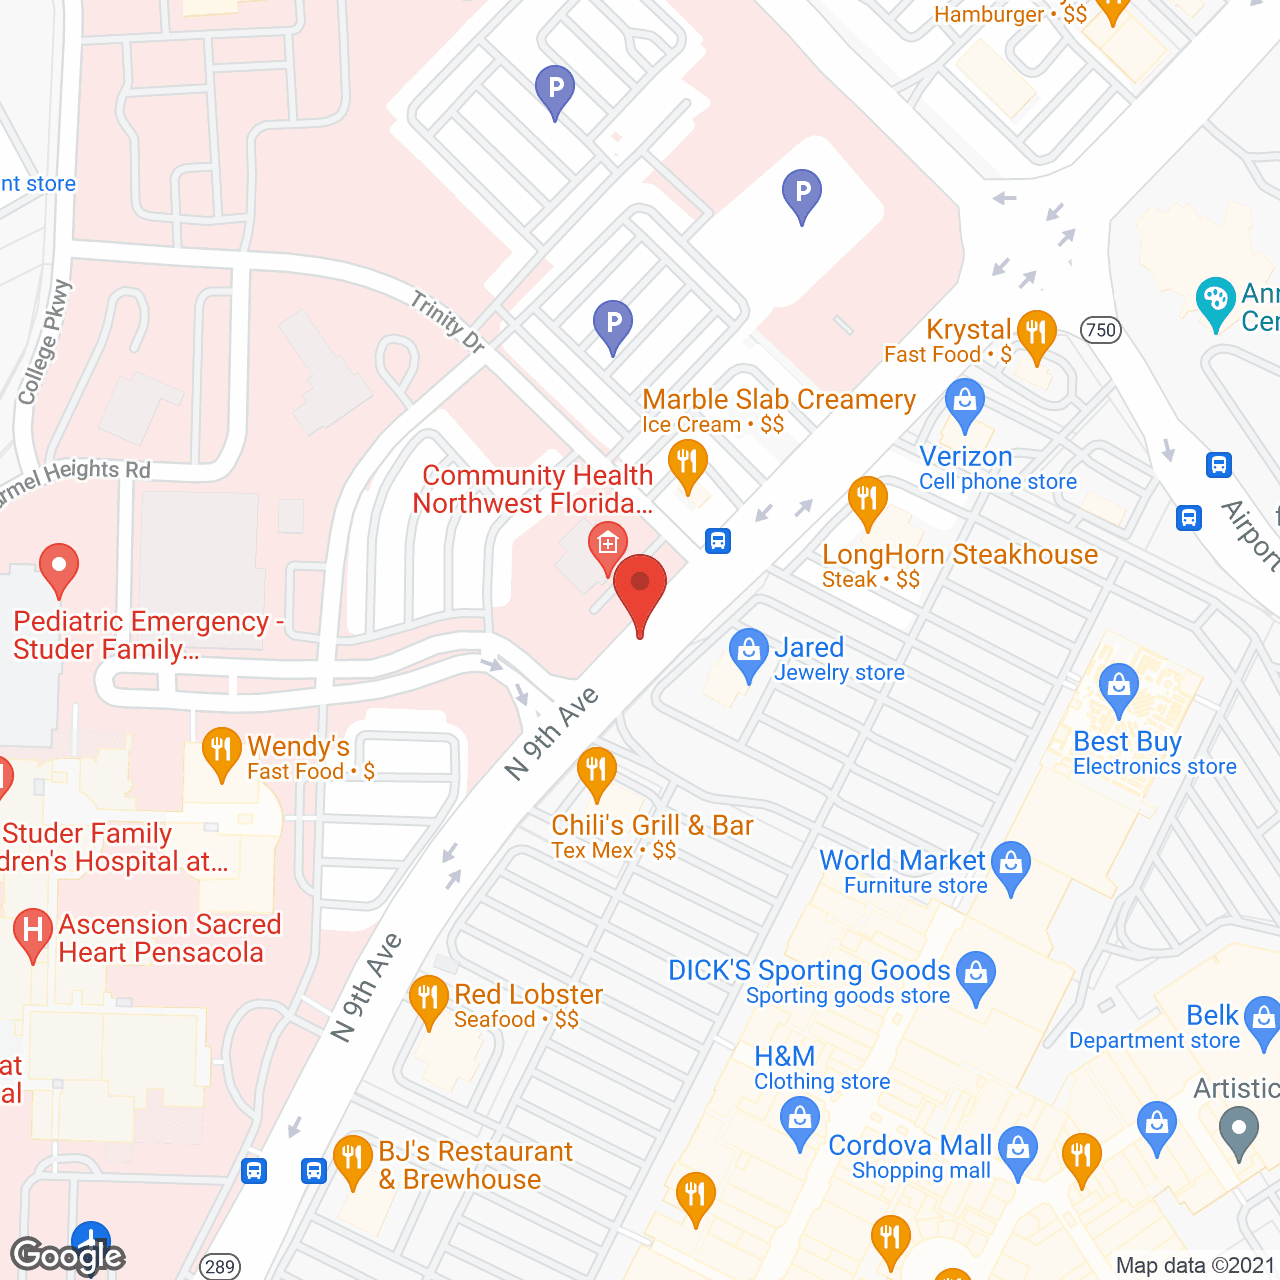 Haven of Our Lady of Peace in google map